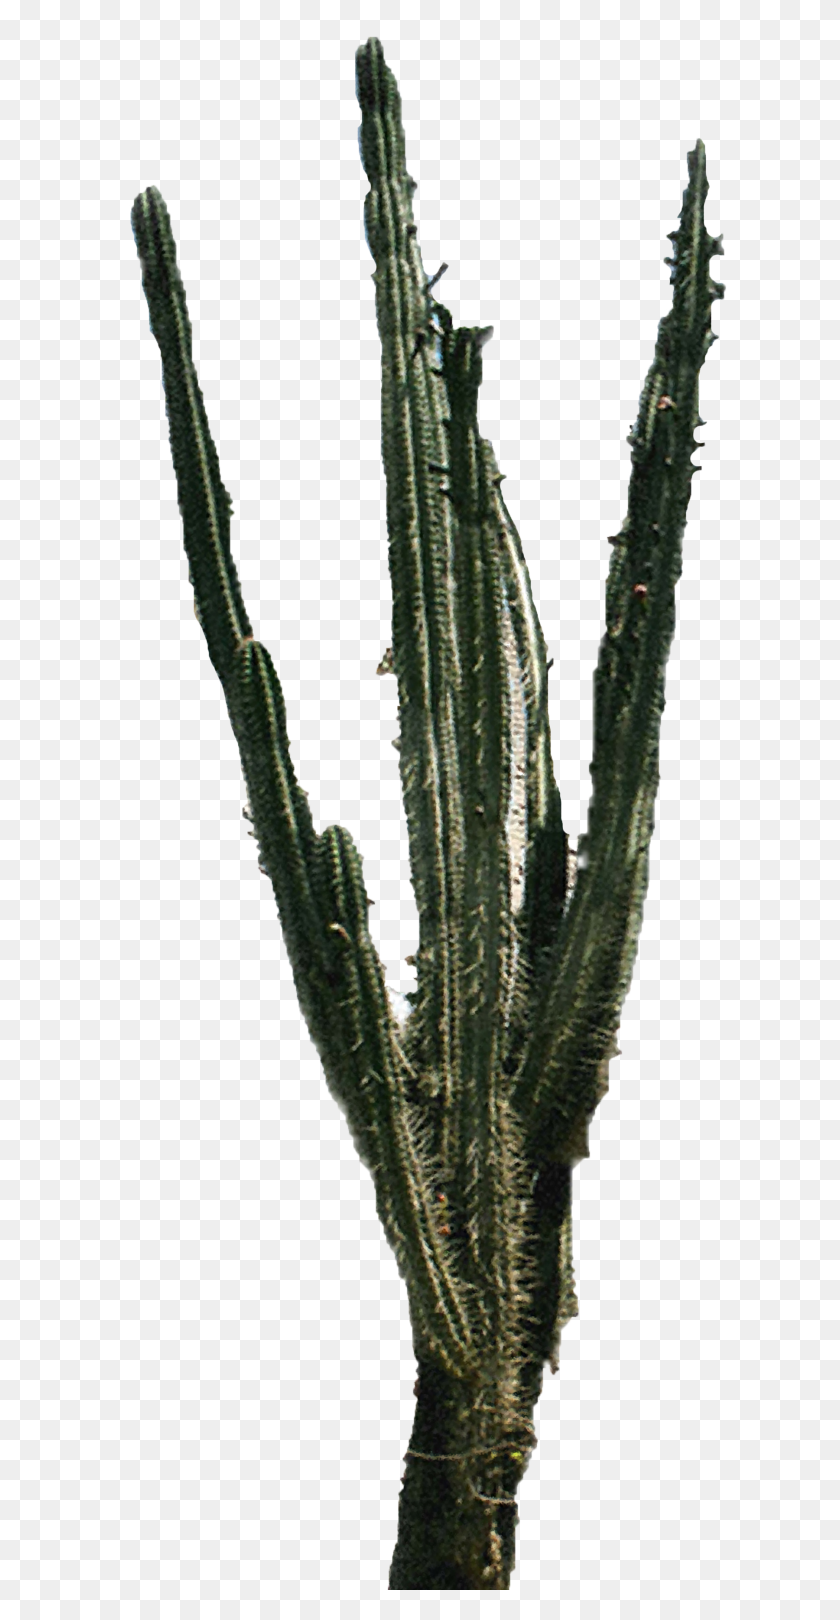 1800x3600 Download Free High Quality Cactus Png Transparent Images - Cactus PNG